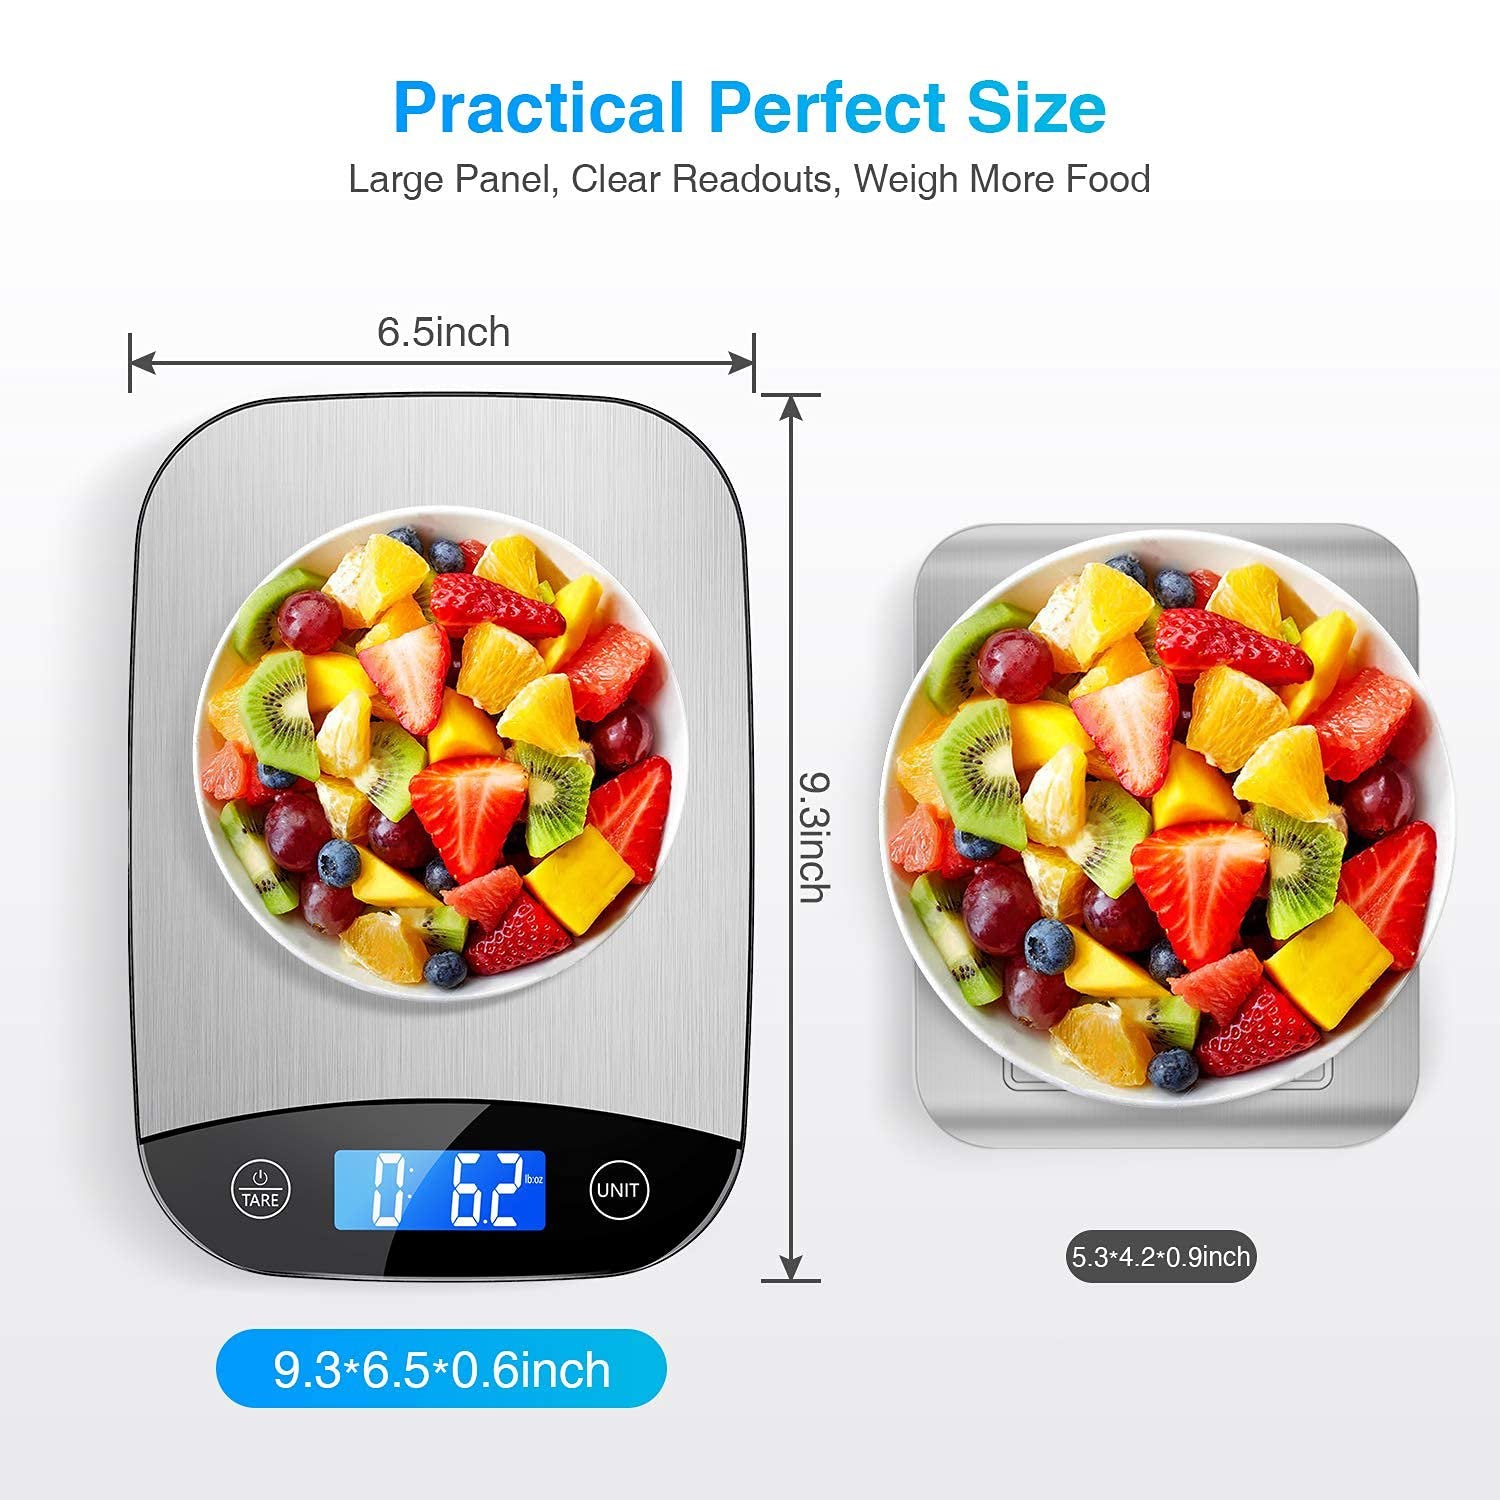 Food Scale,Digital Kitchen Scale Weight Grams and oz for Cooking Baking, 1g/0.1oz Precise Graduation, Stainless Steel and Tempered Glass, Size: 9